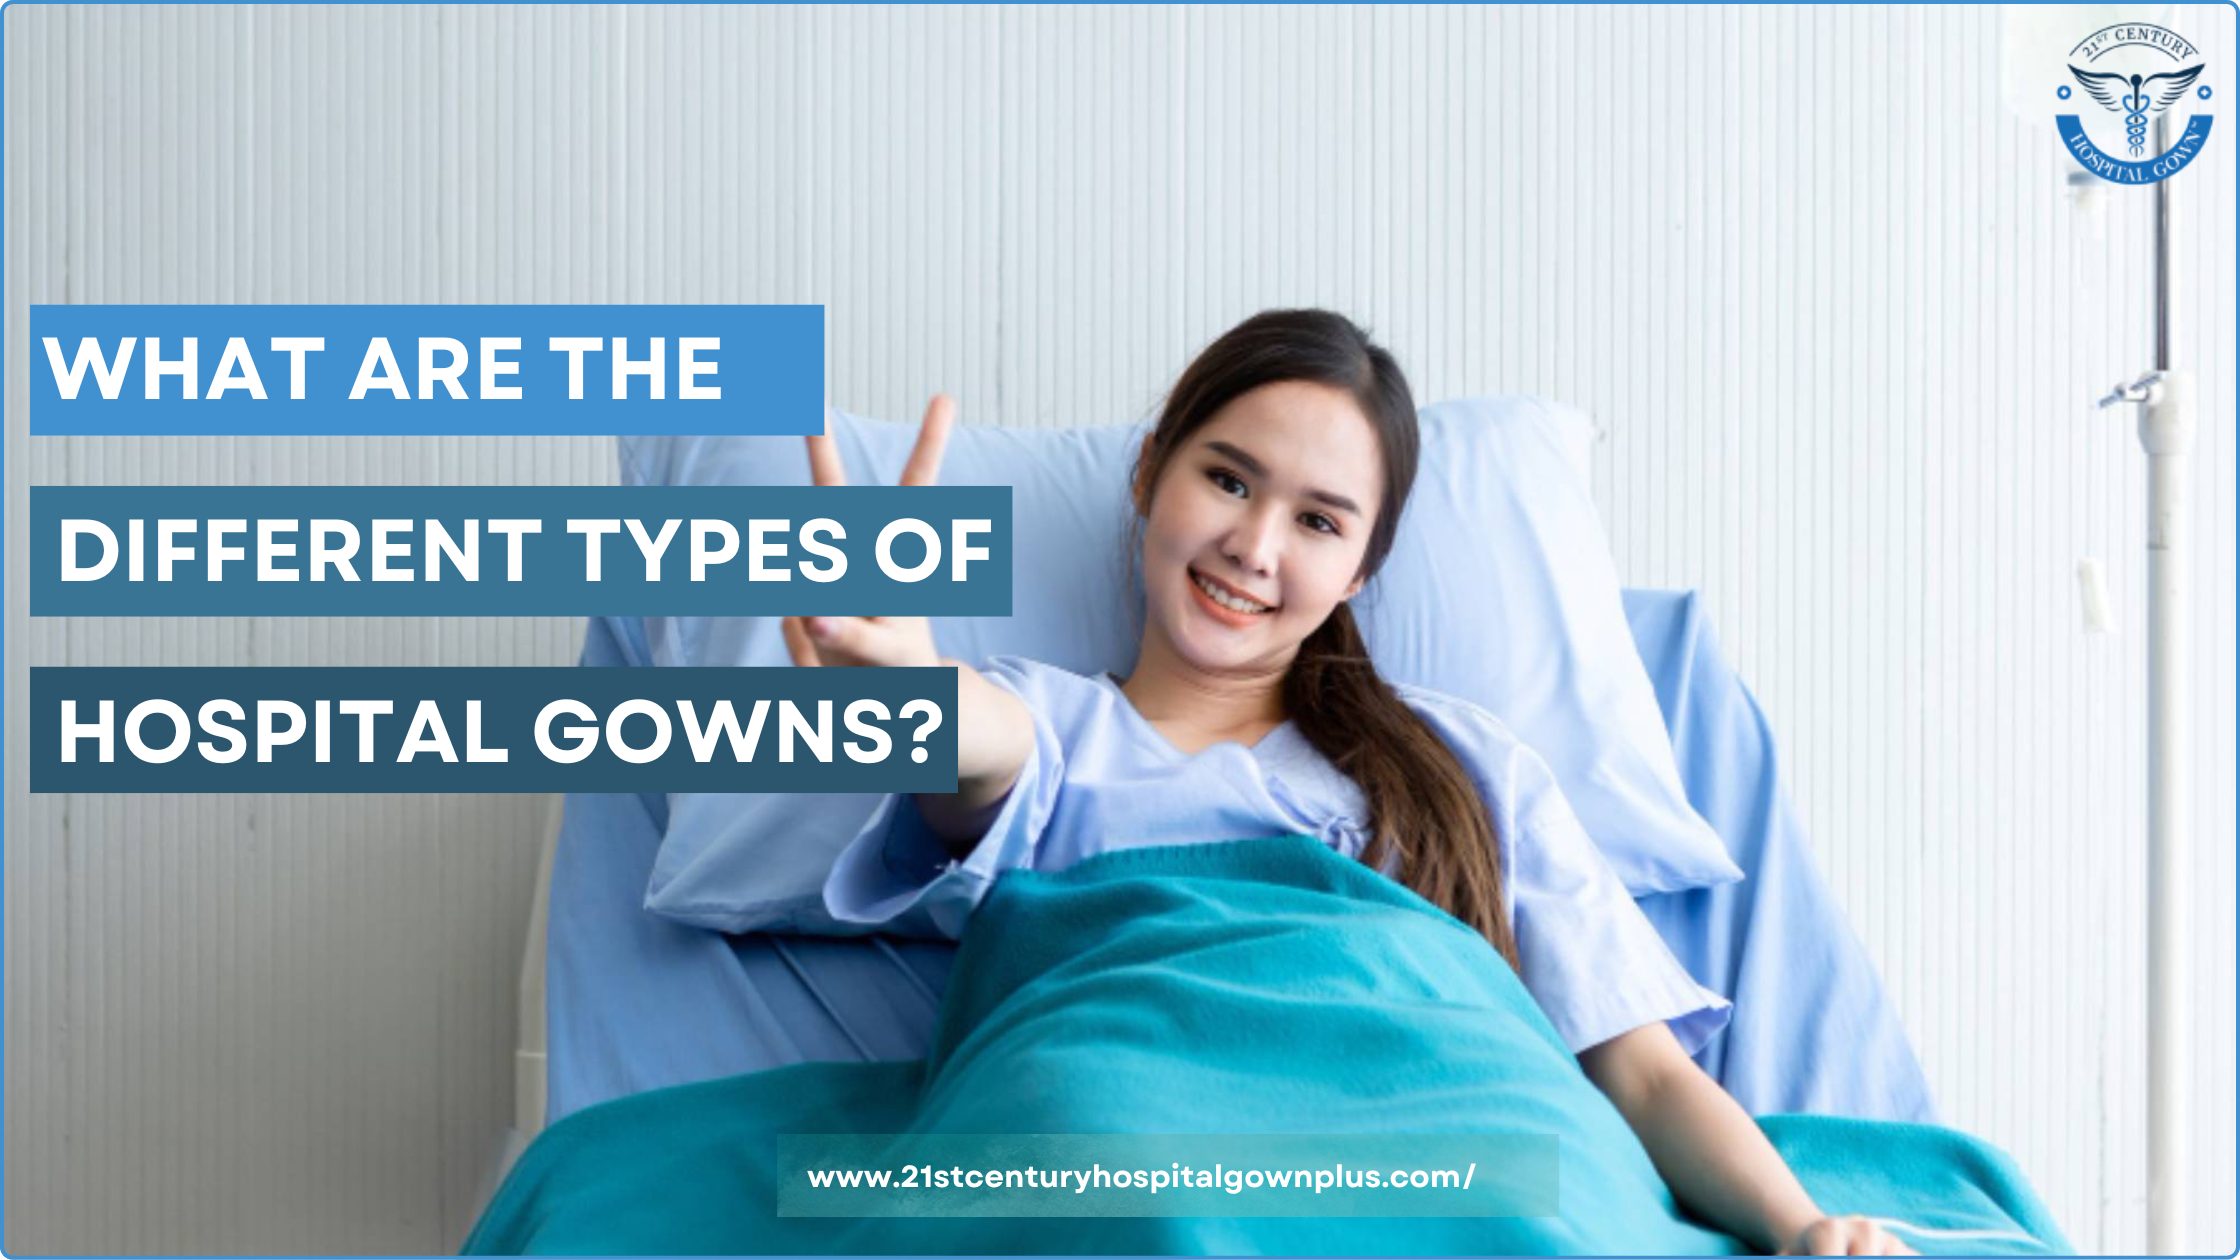 Different Types of Hospital Gowns